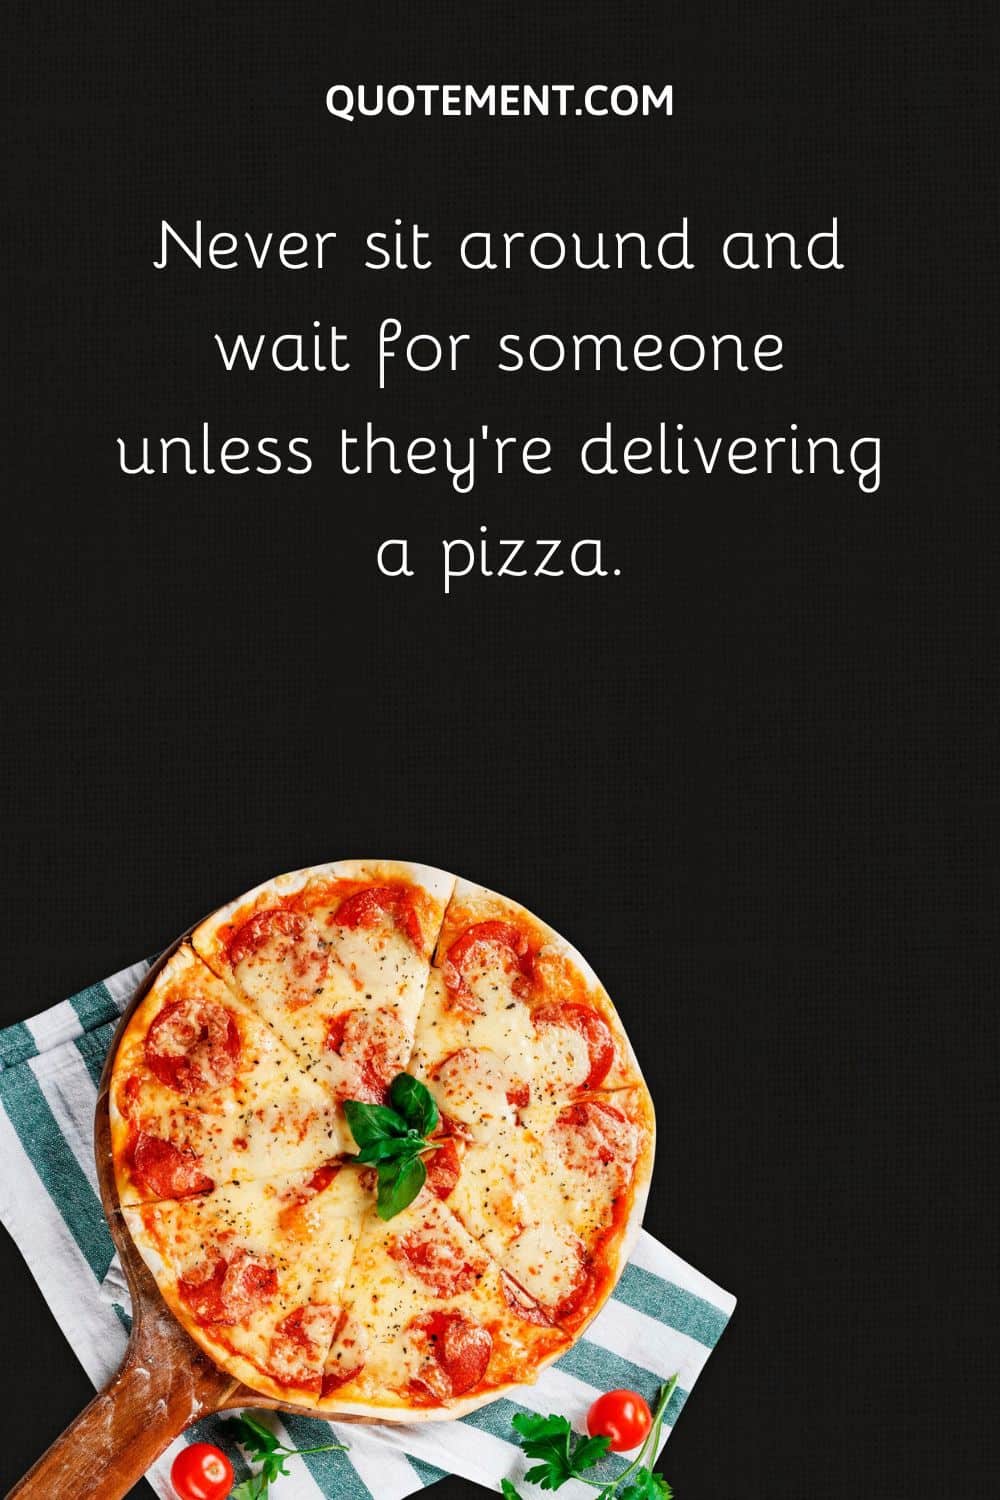 Never sit around and wait for someone unless they’re delivering a pizza